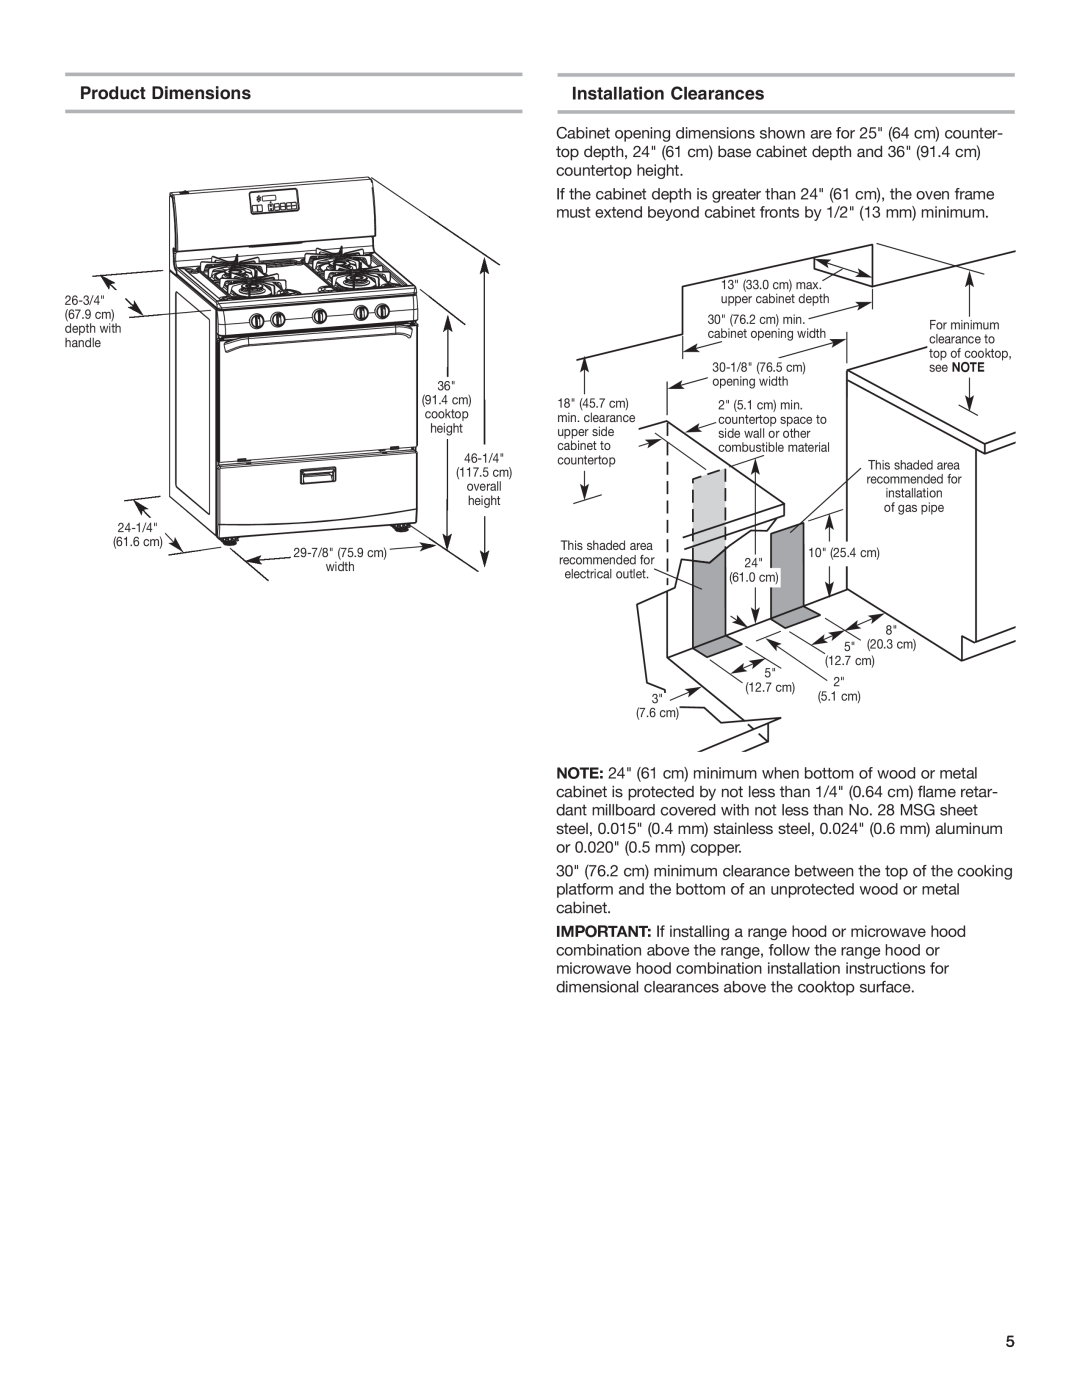 Whirlpool W10153329A installation instructions Product Dimensions, Installation Clearances 